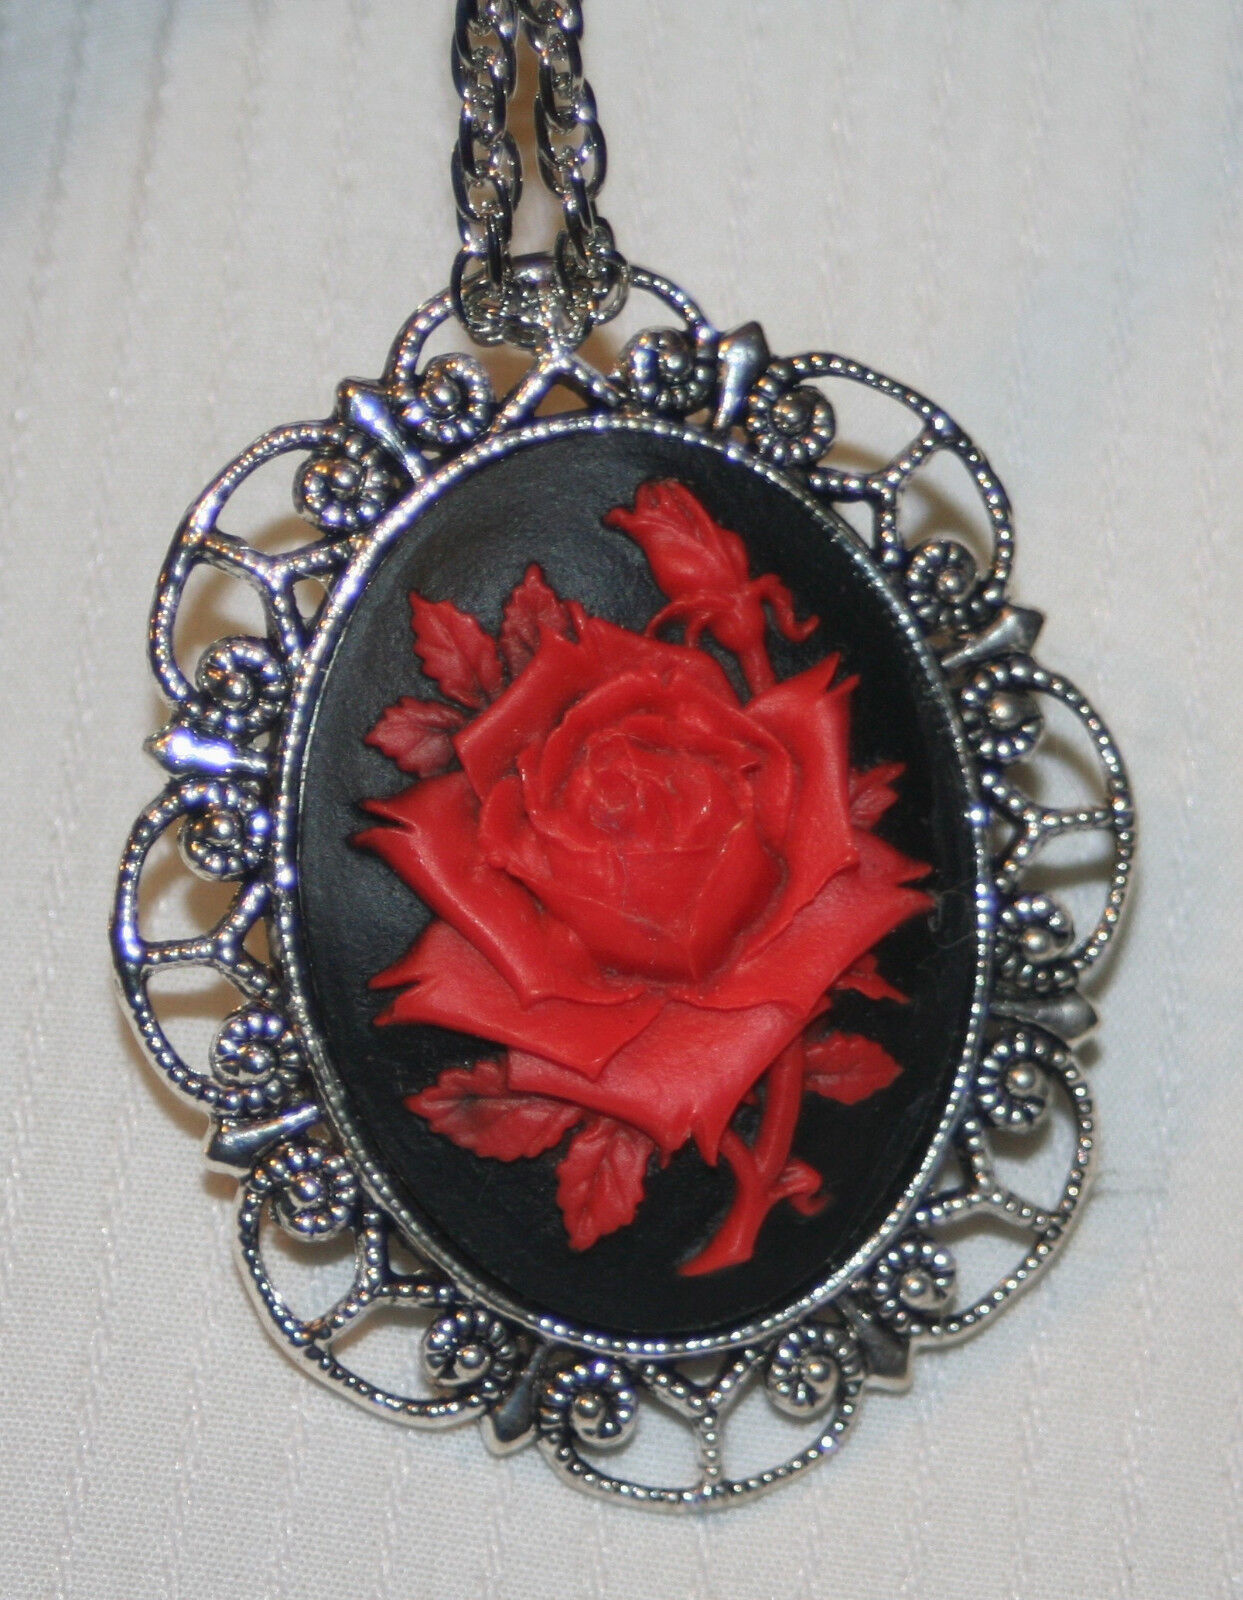 Lovely Scallop Rim Silvertone Black Raised Red Rose Cameo Necklace Brooch Pin